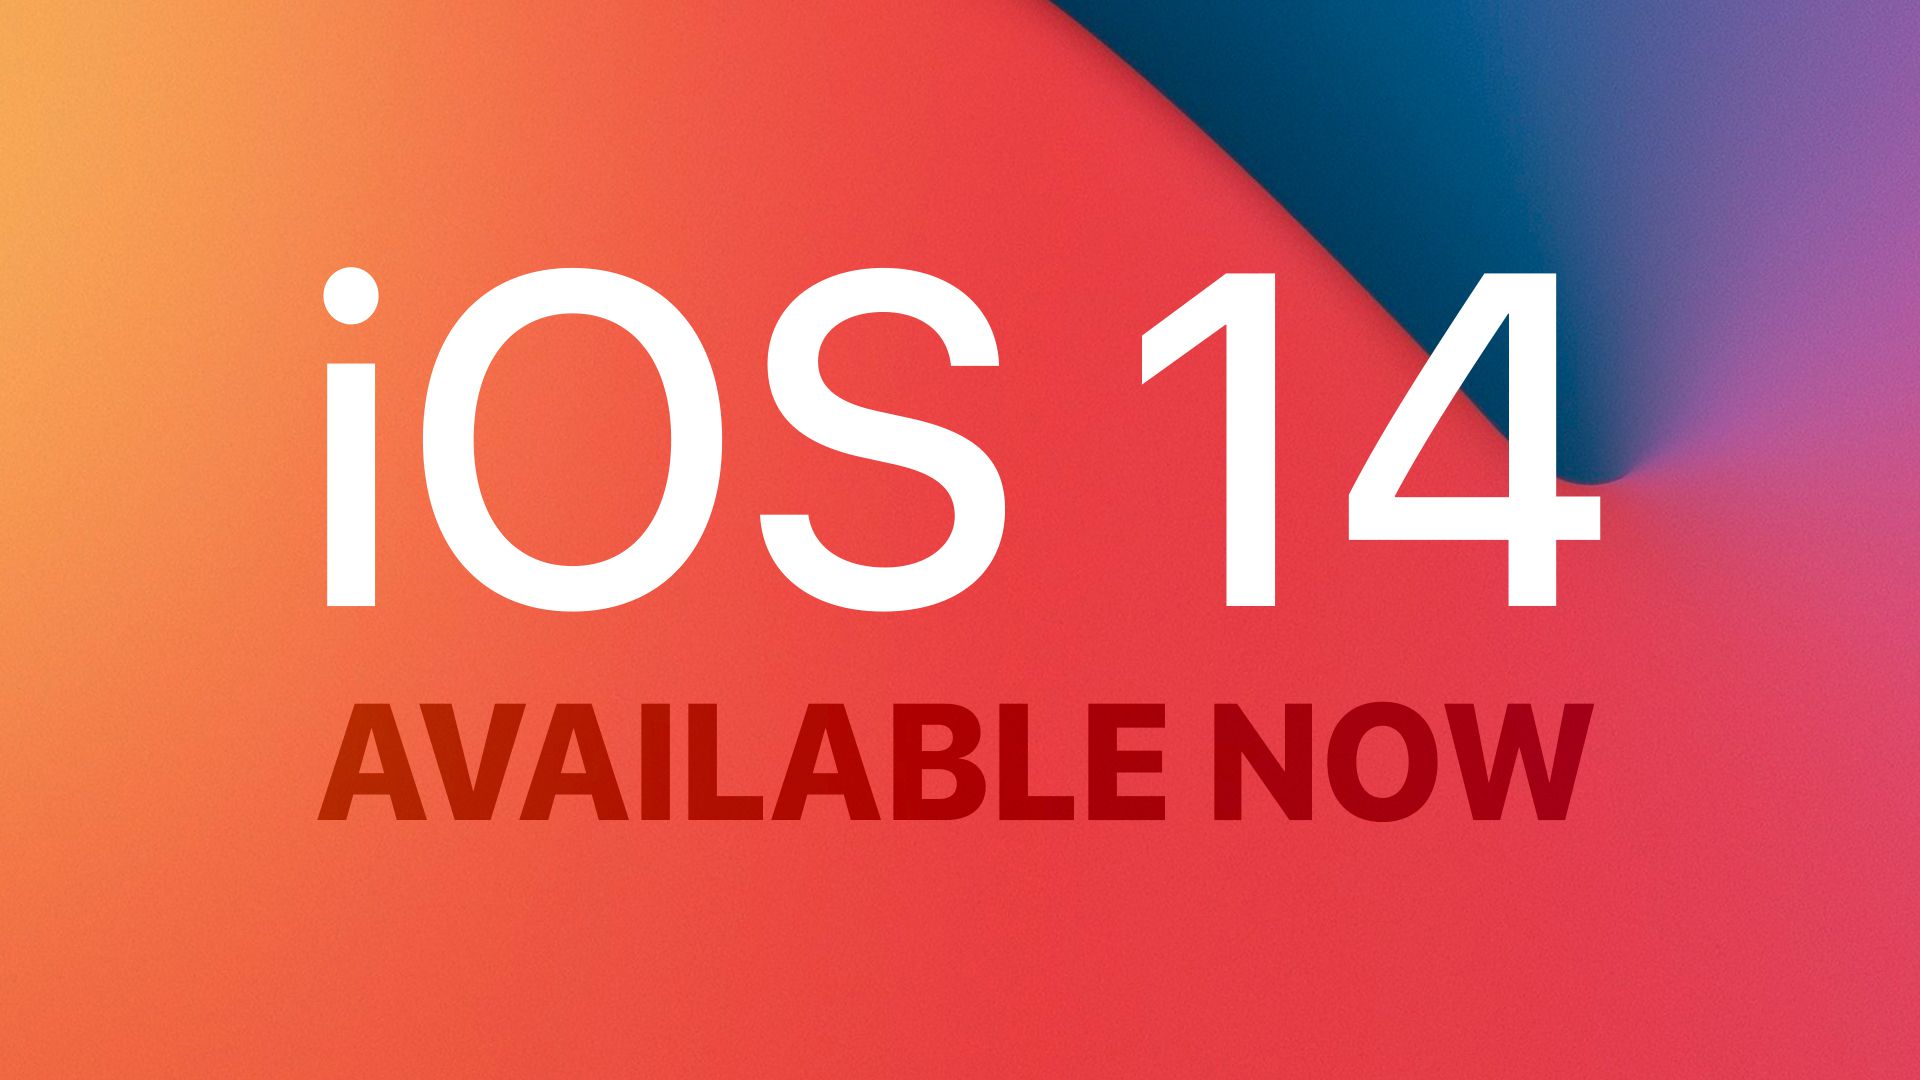 Apple Releases Ios 14 And Ipados 14 With Home Screen Redesign App Library Compact Ui Translate App Scribble Support App Clips And More Macrumors